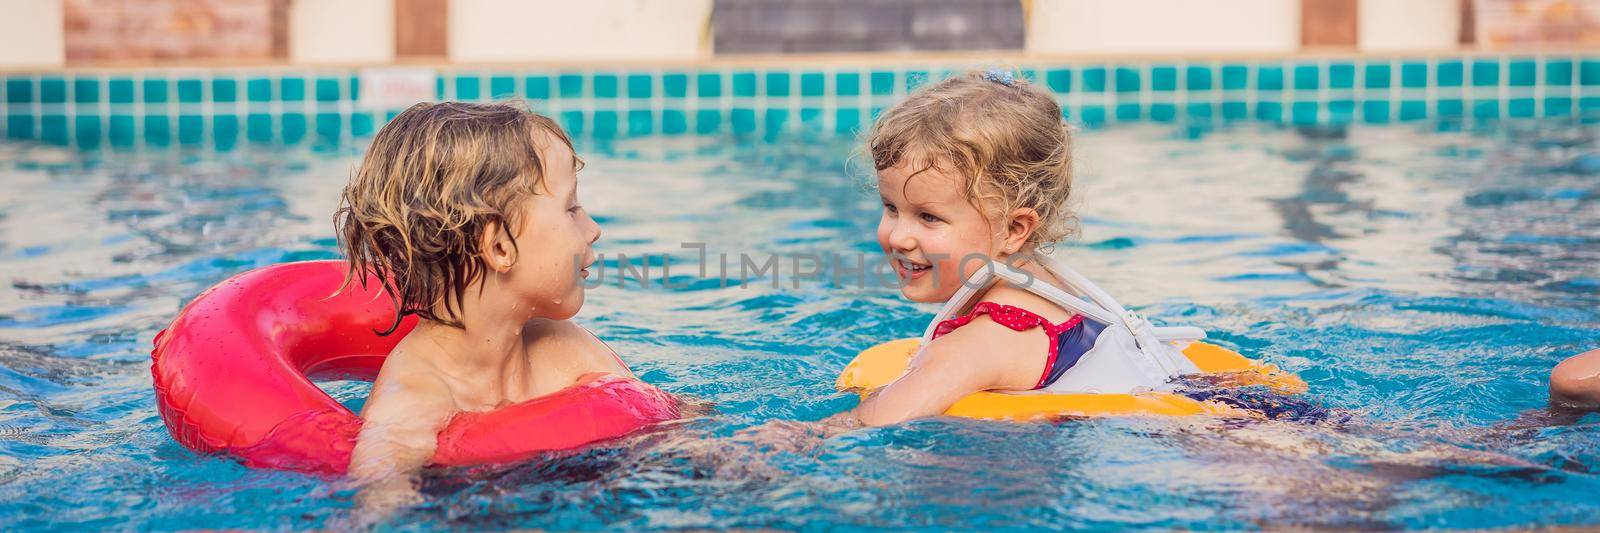 two little kids playing in the swimming pool. BANNER, LONG FORMAT